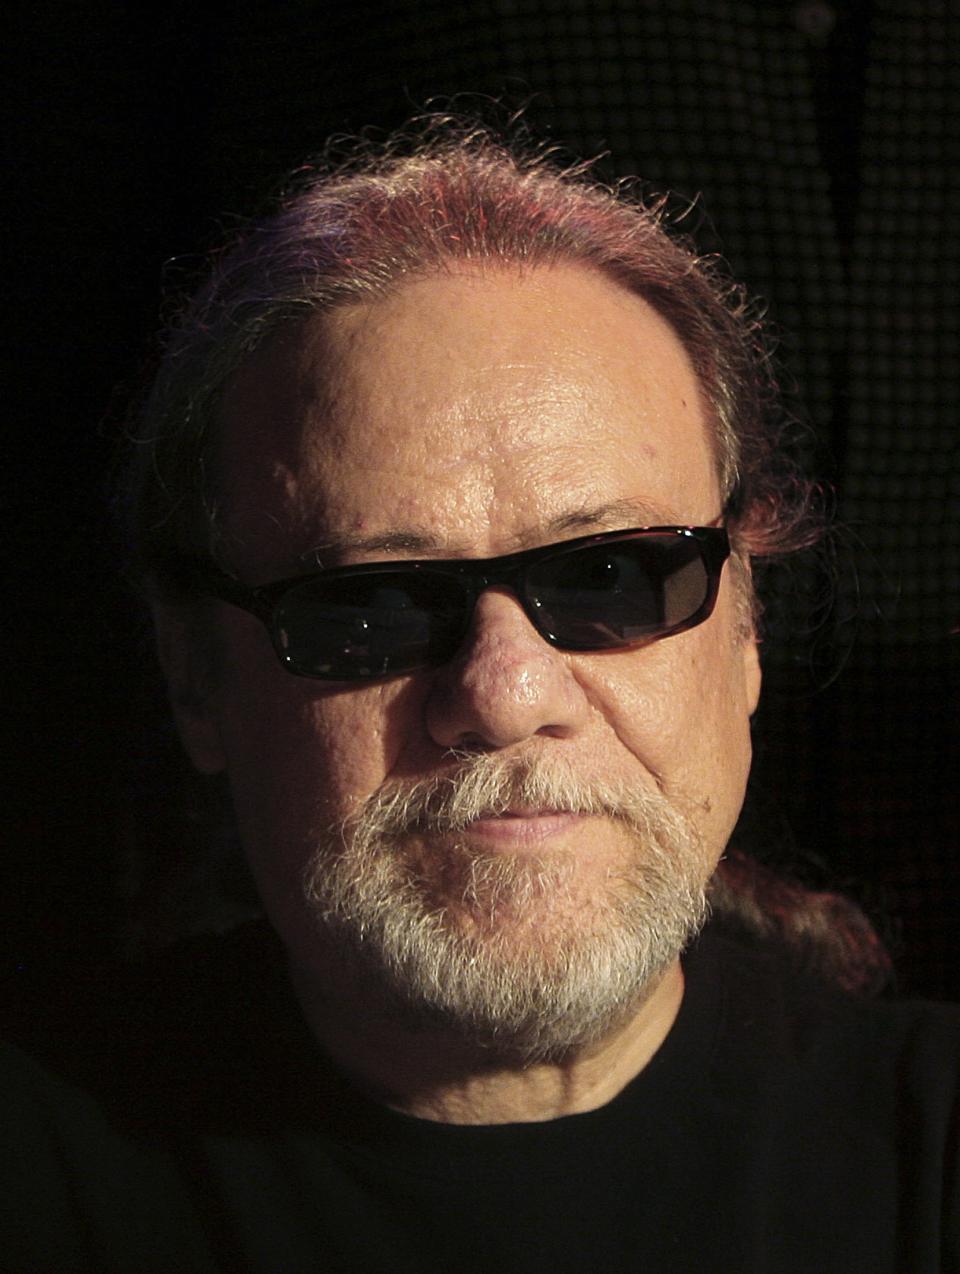 File photo of musician Tommy Ramone lending his support in the "Save CBGB" campaign in New York